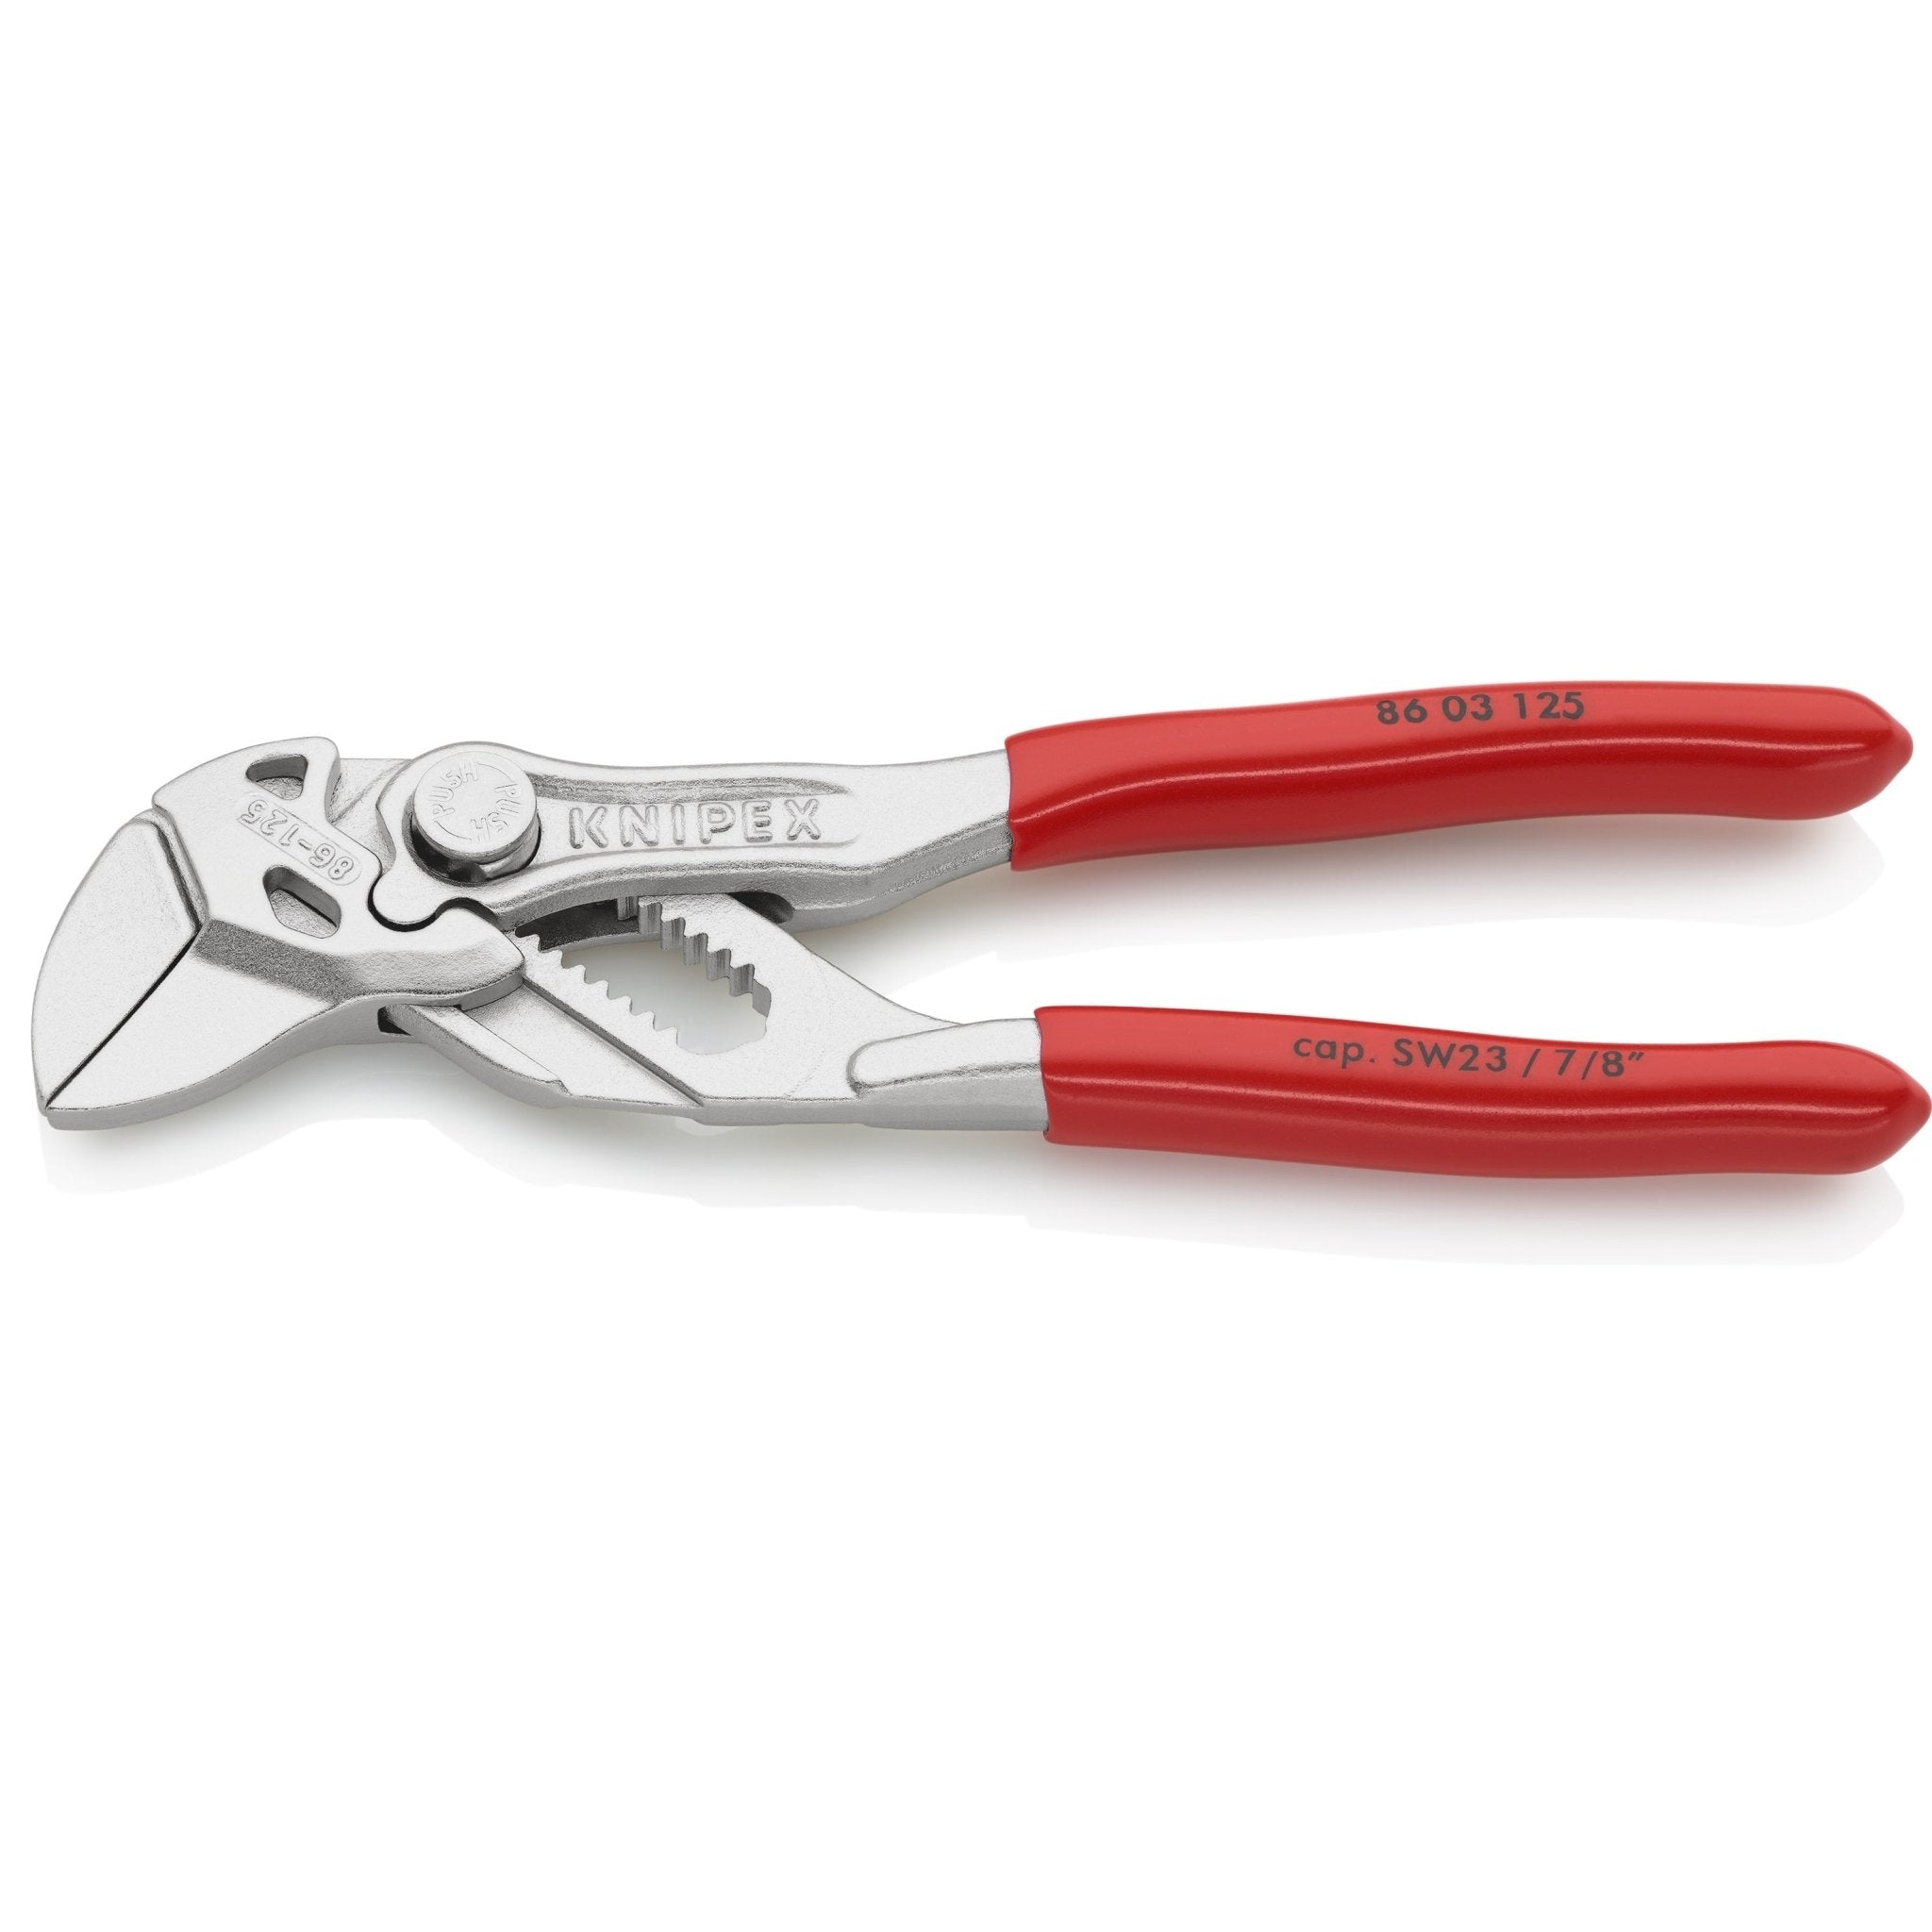 Knipex 5" Mini Wrench Plier